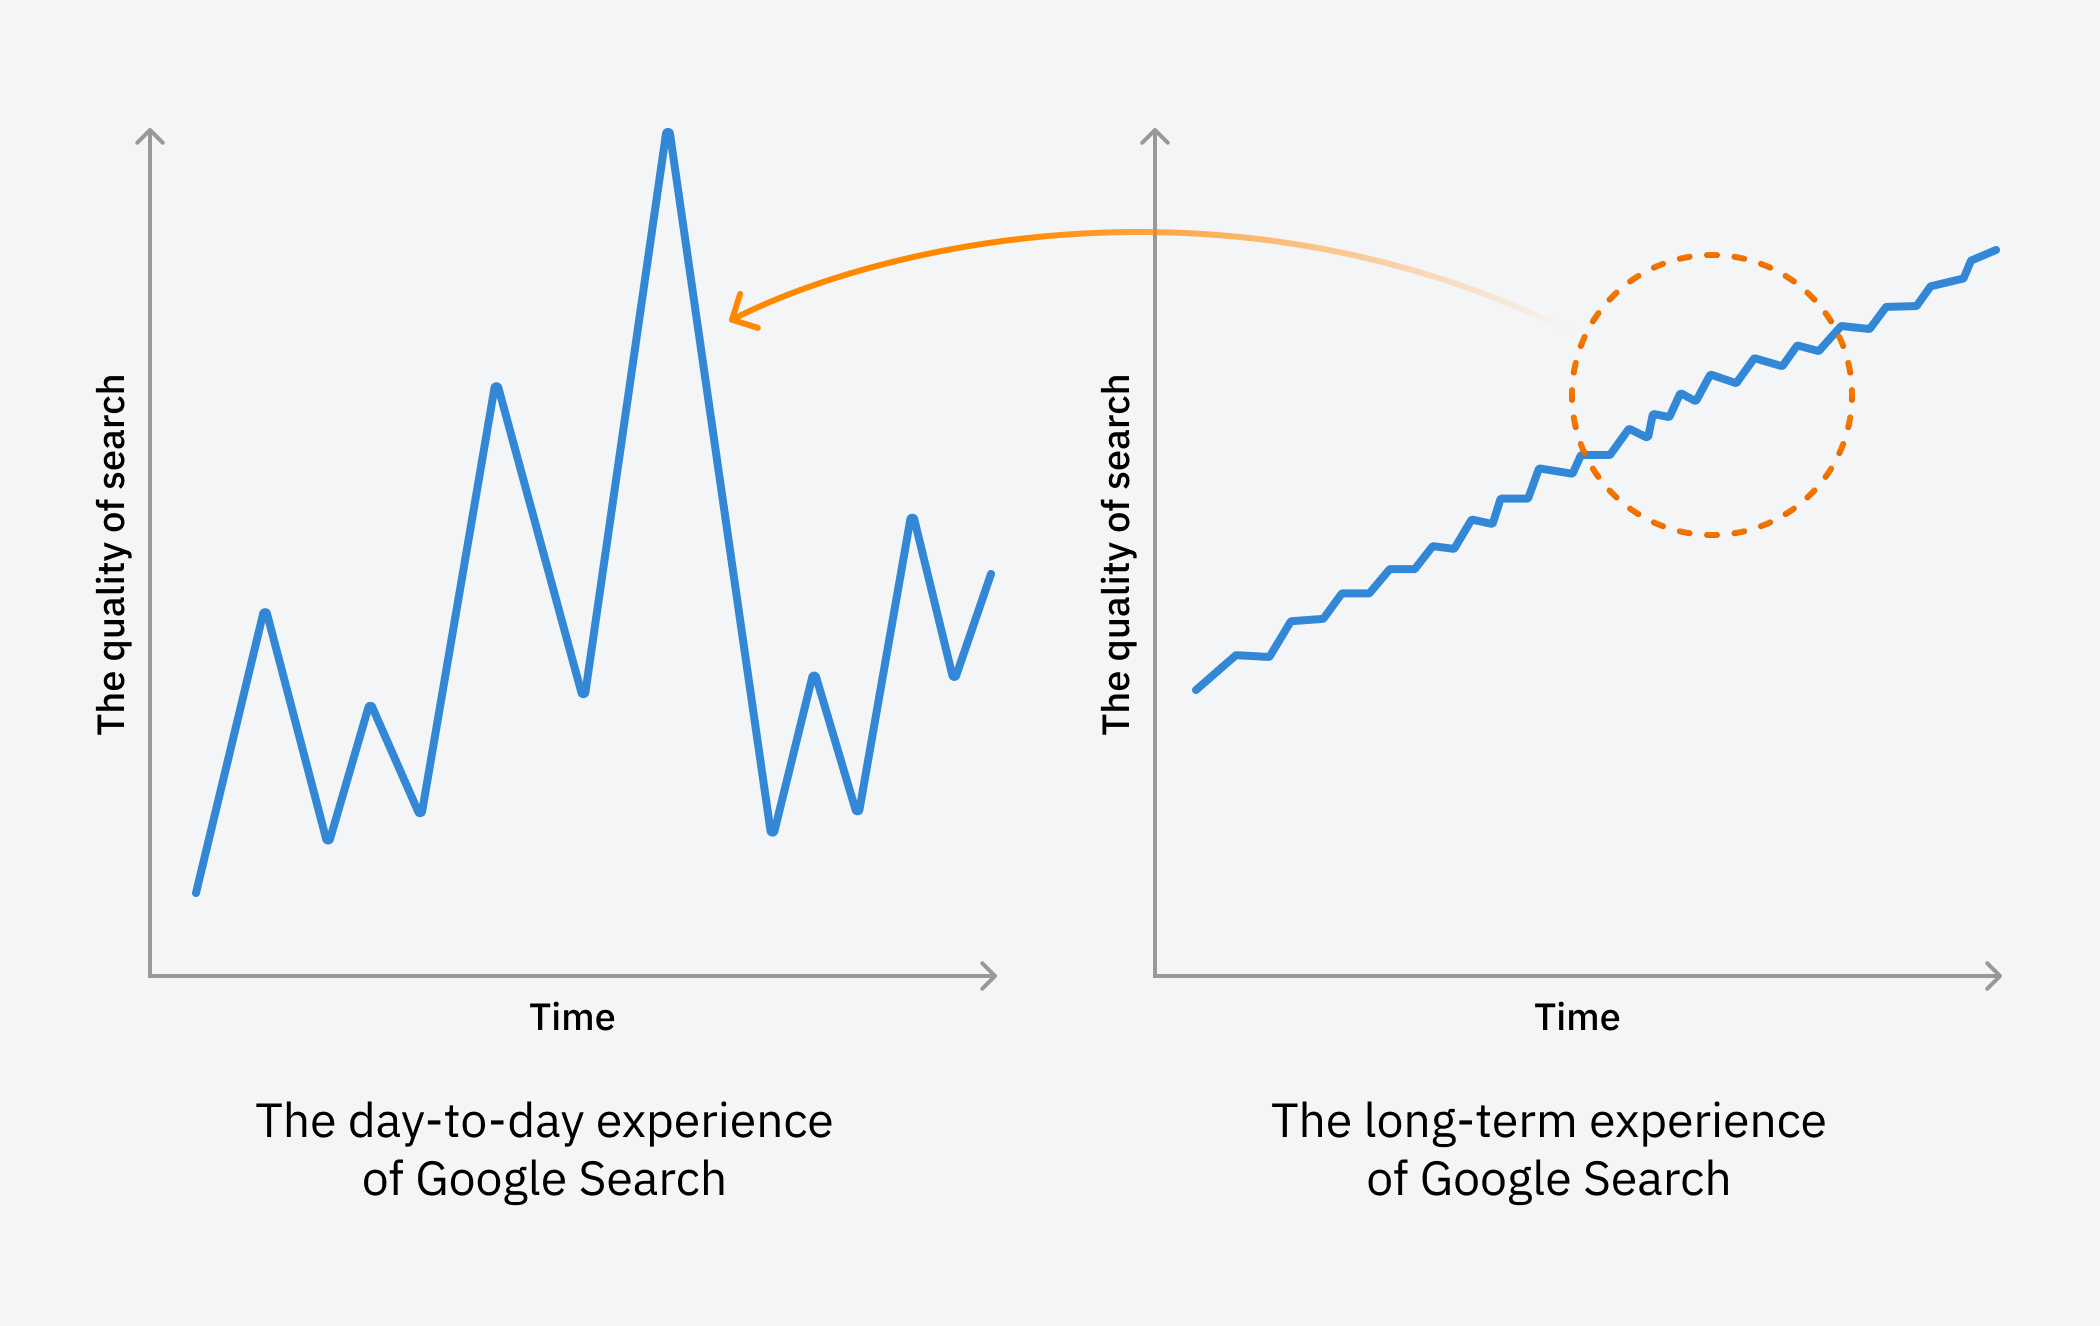 Illustration: the day-to-day experience of Google Search is volatile, but the long-term experience is trending upwards